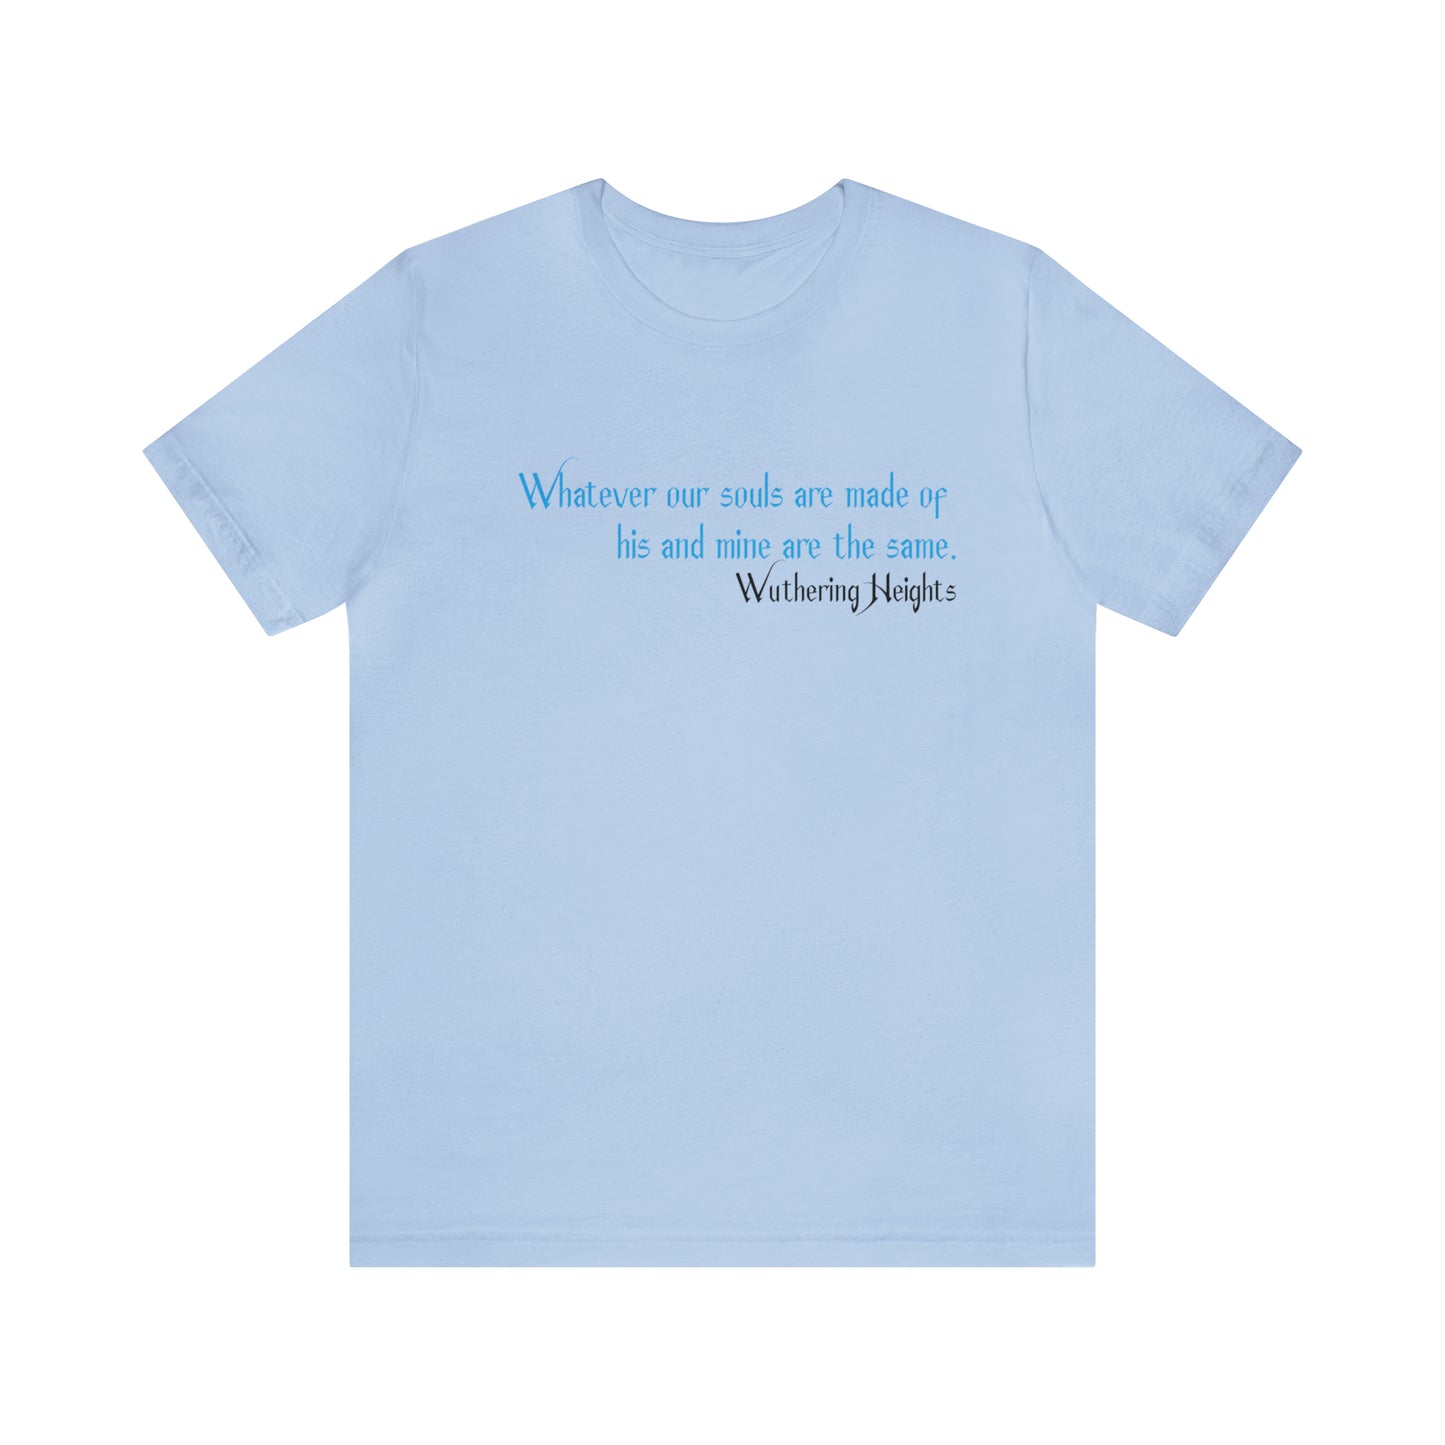 What our souls are made up Jersey Short Sleeve Tee